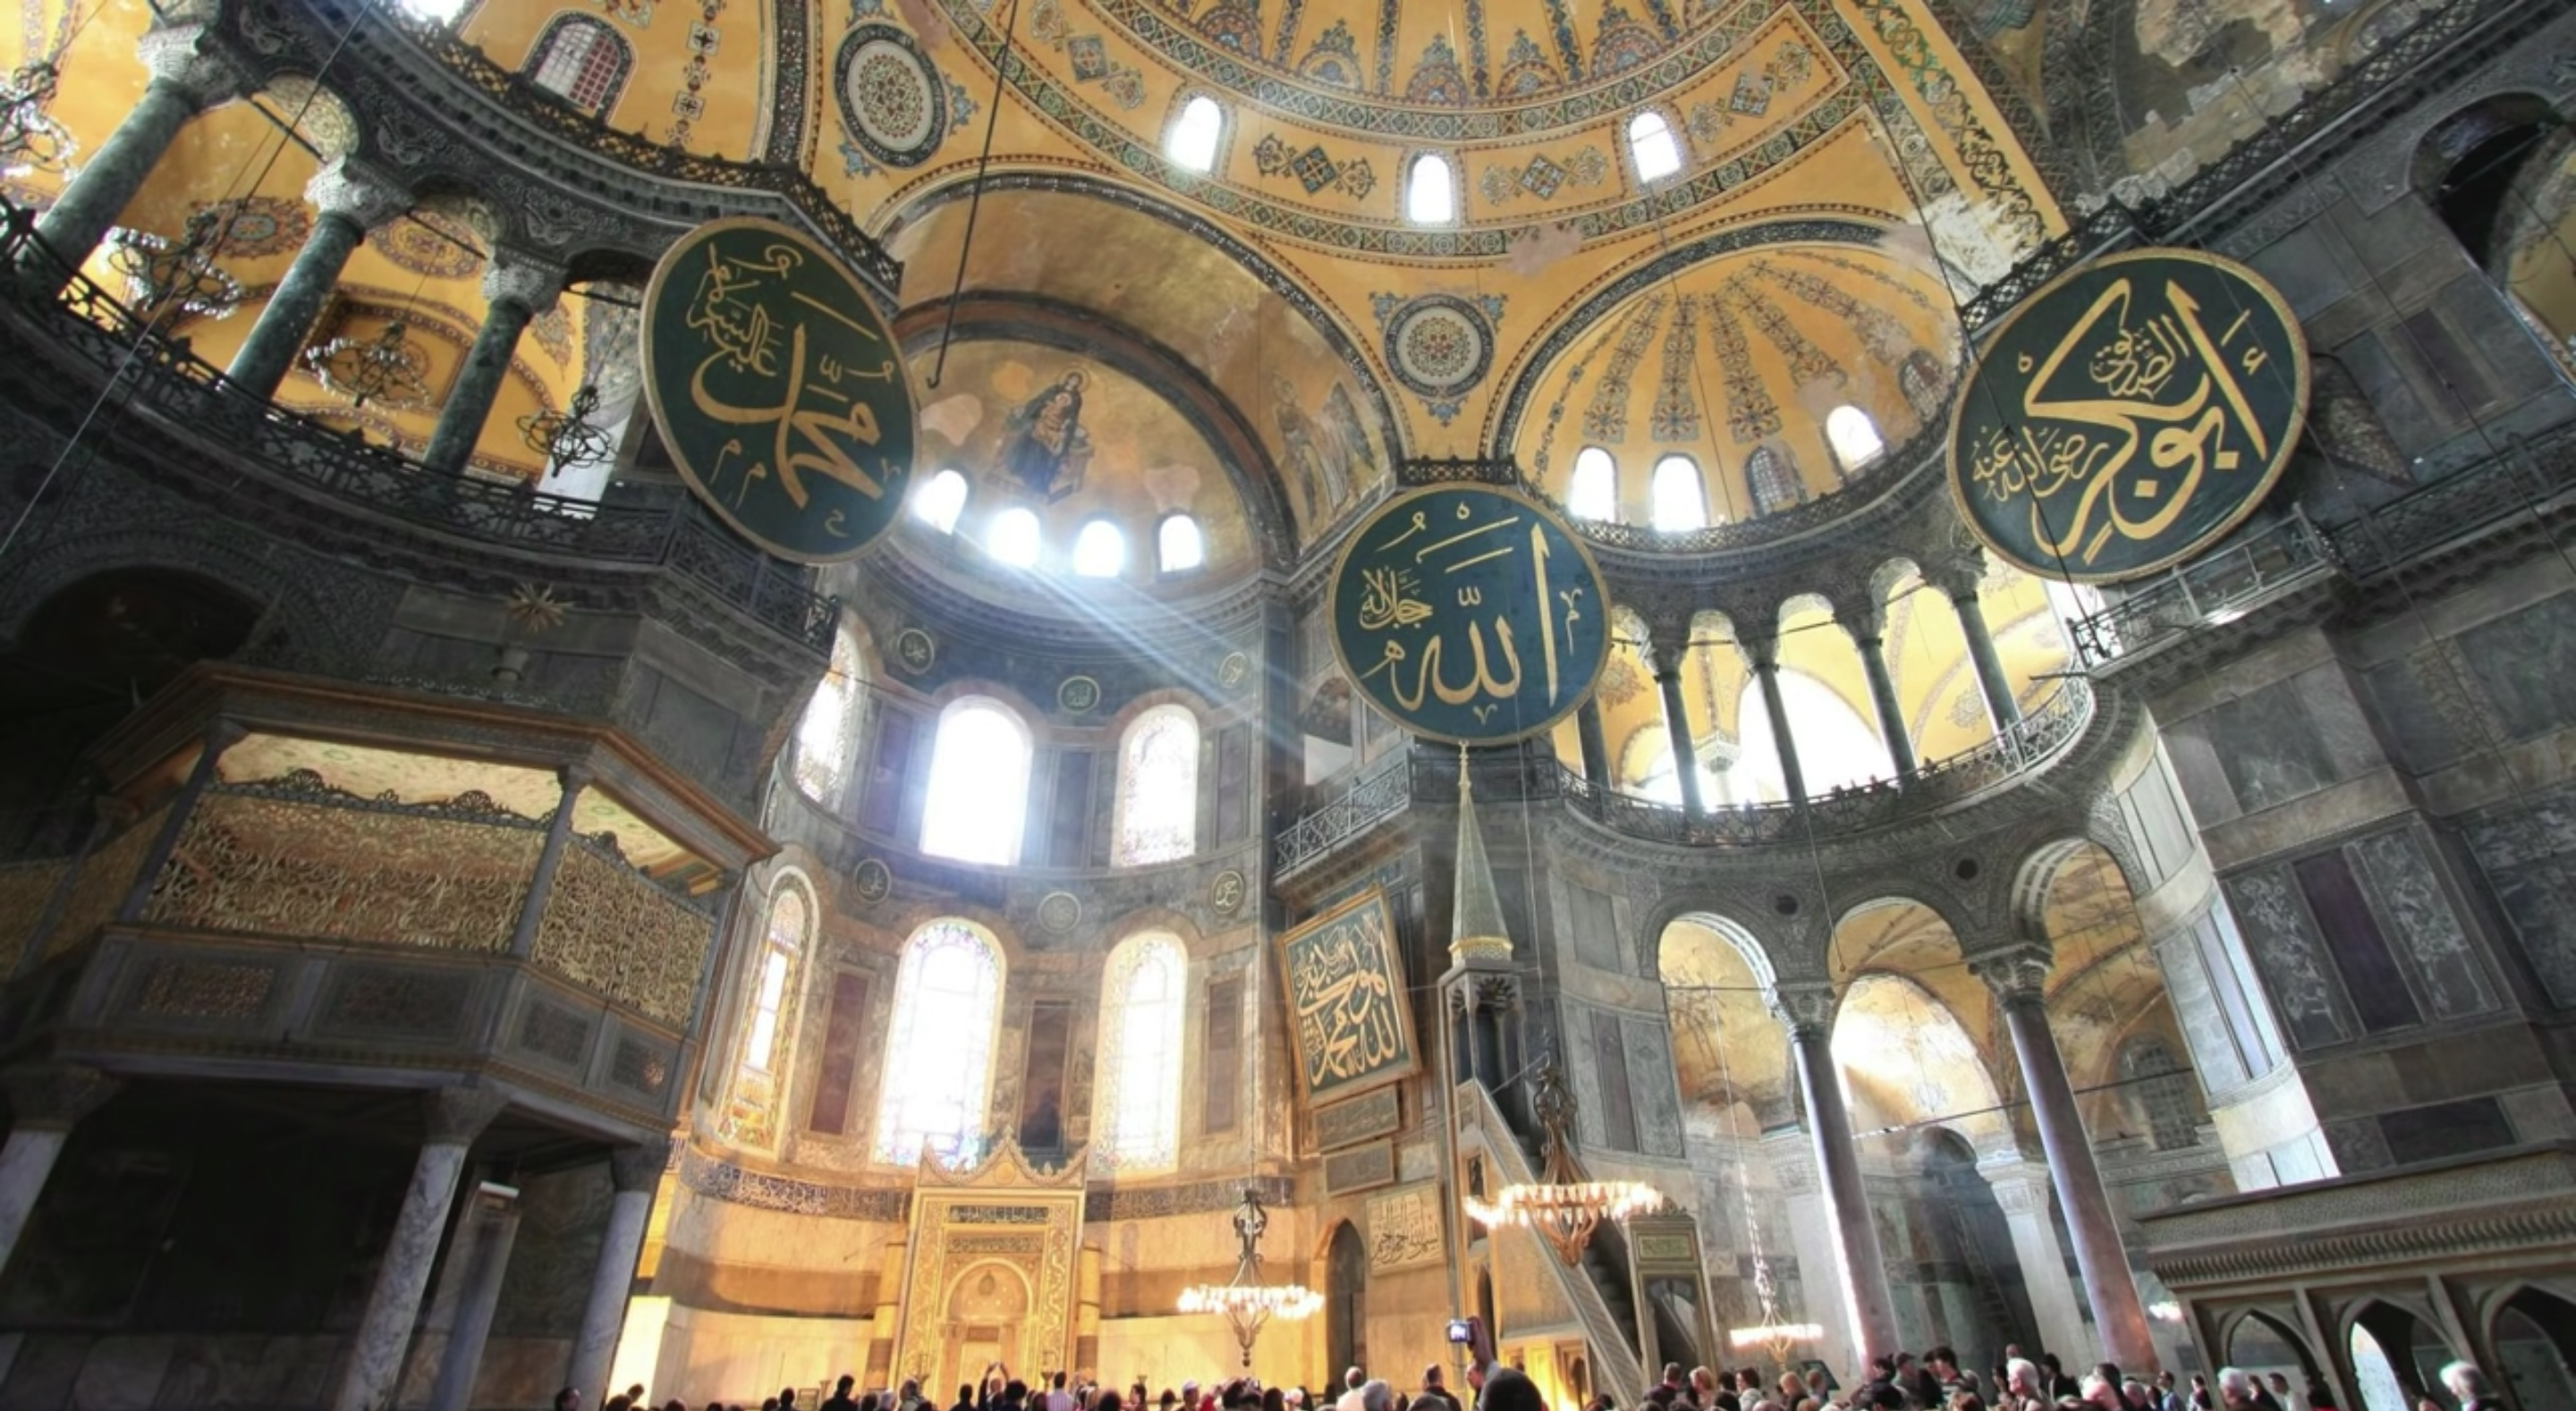 Interior view of Hagia Sophia with light streaming through the windows of the apse.